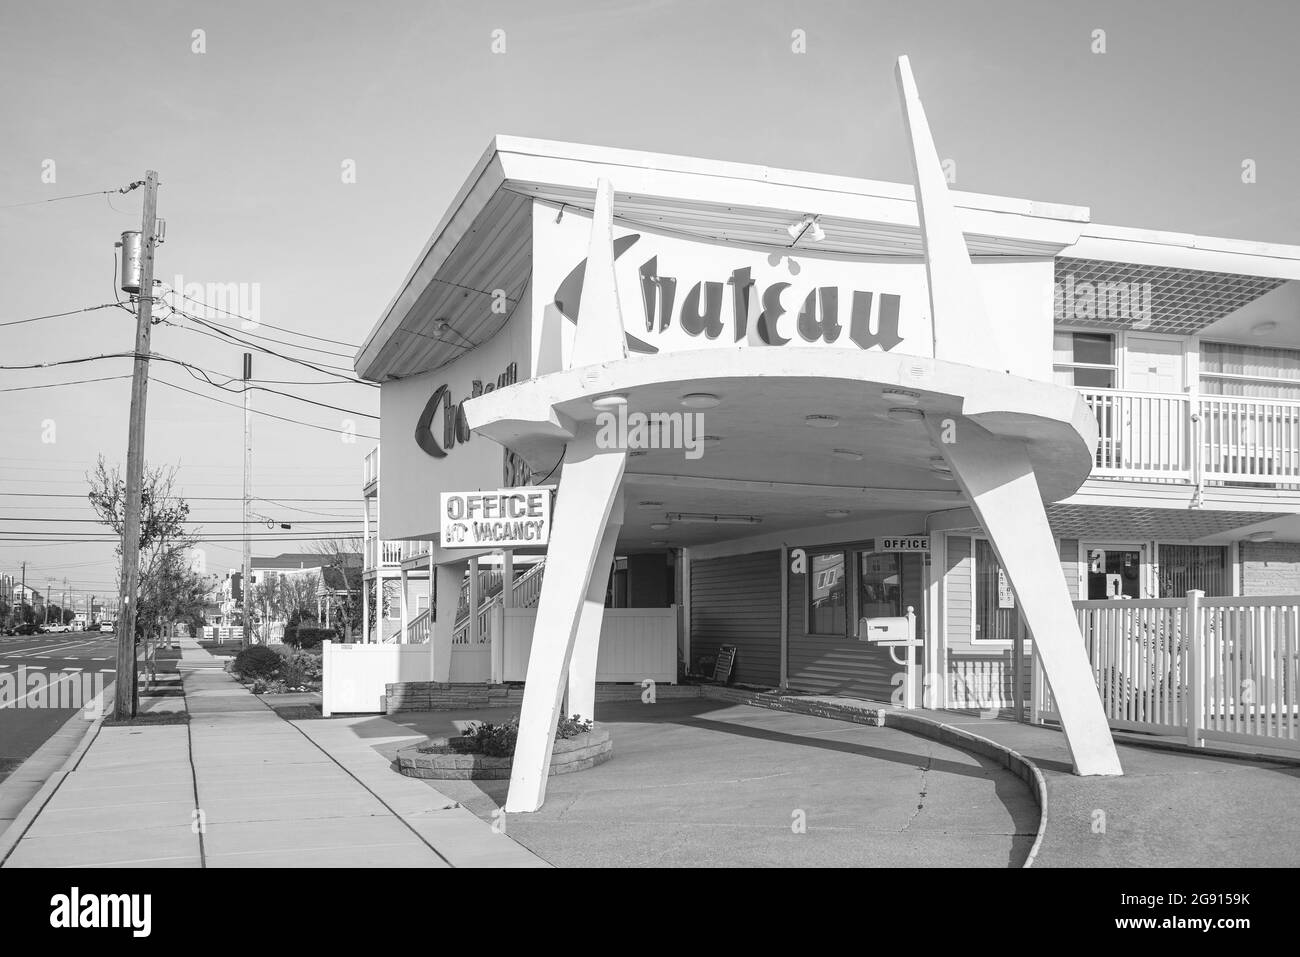 The Chateau Bleu Motel, in Wildwood, New Jersey Stock Photo